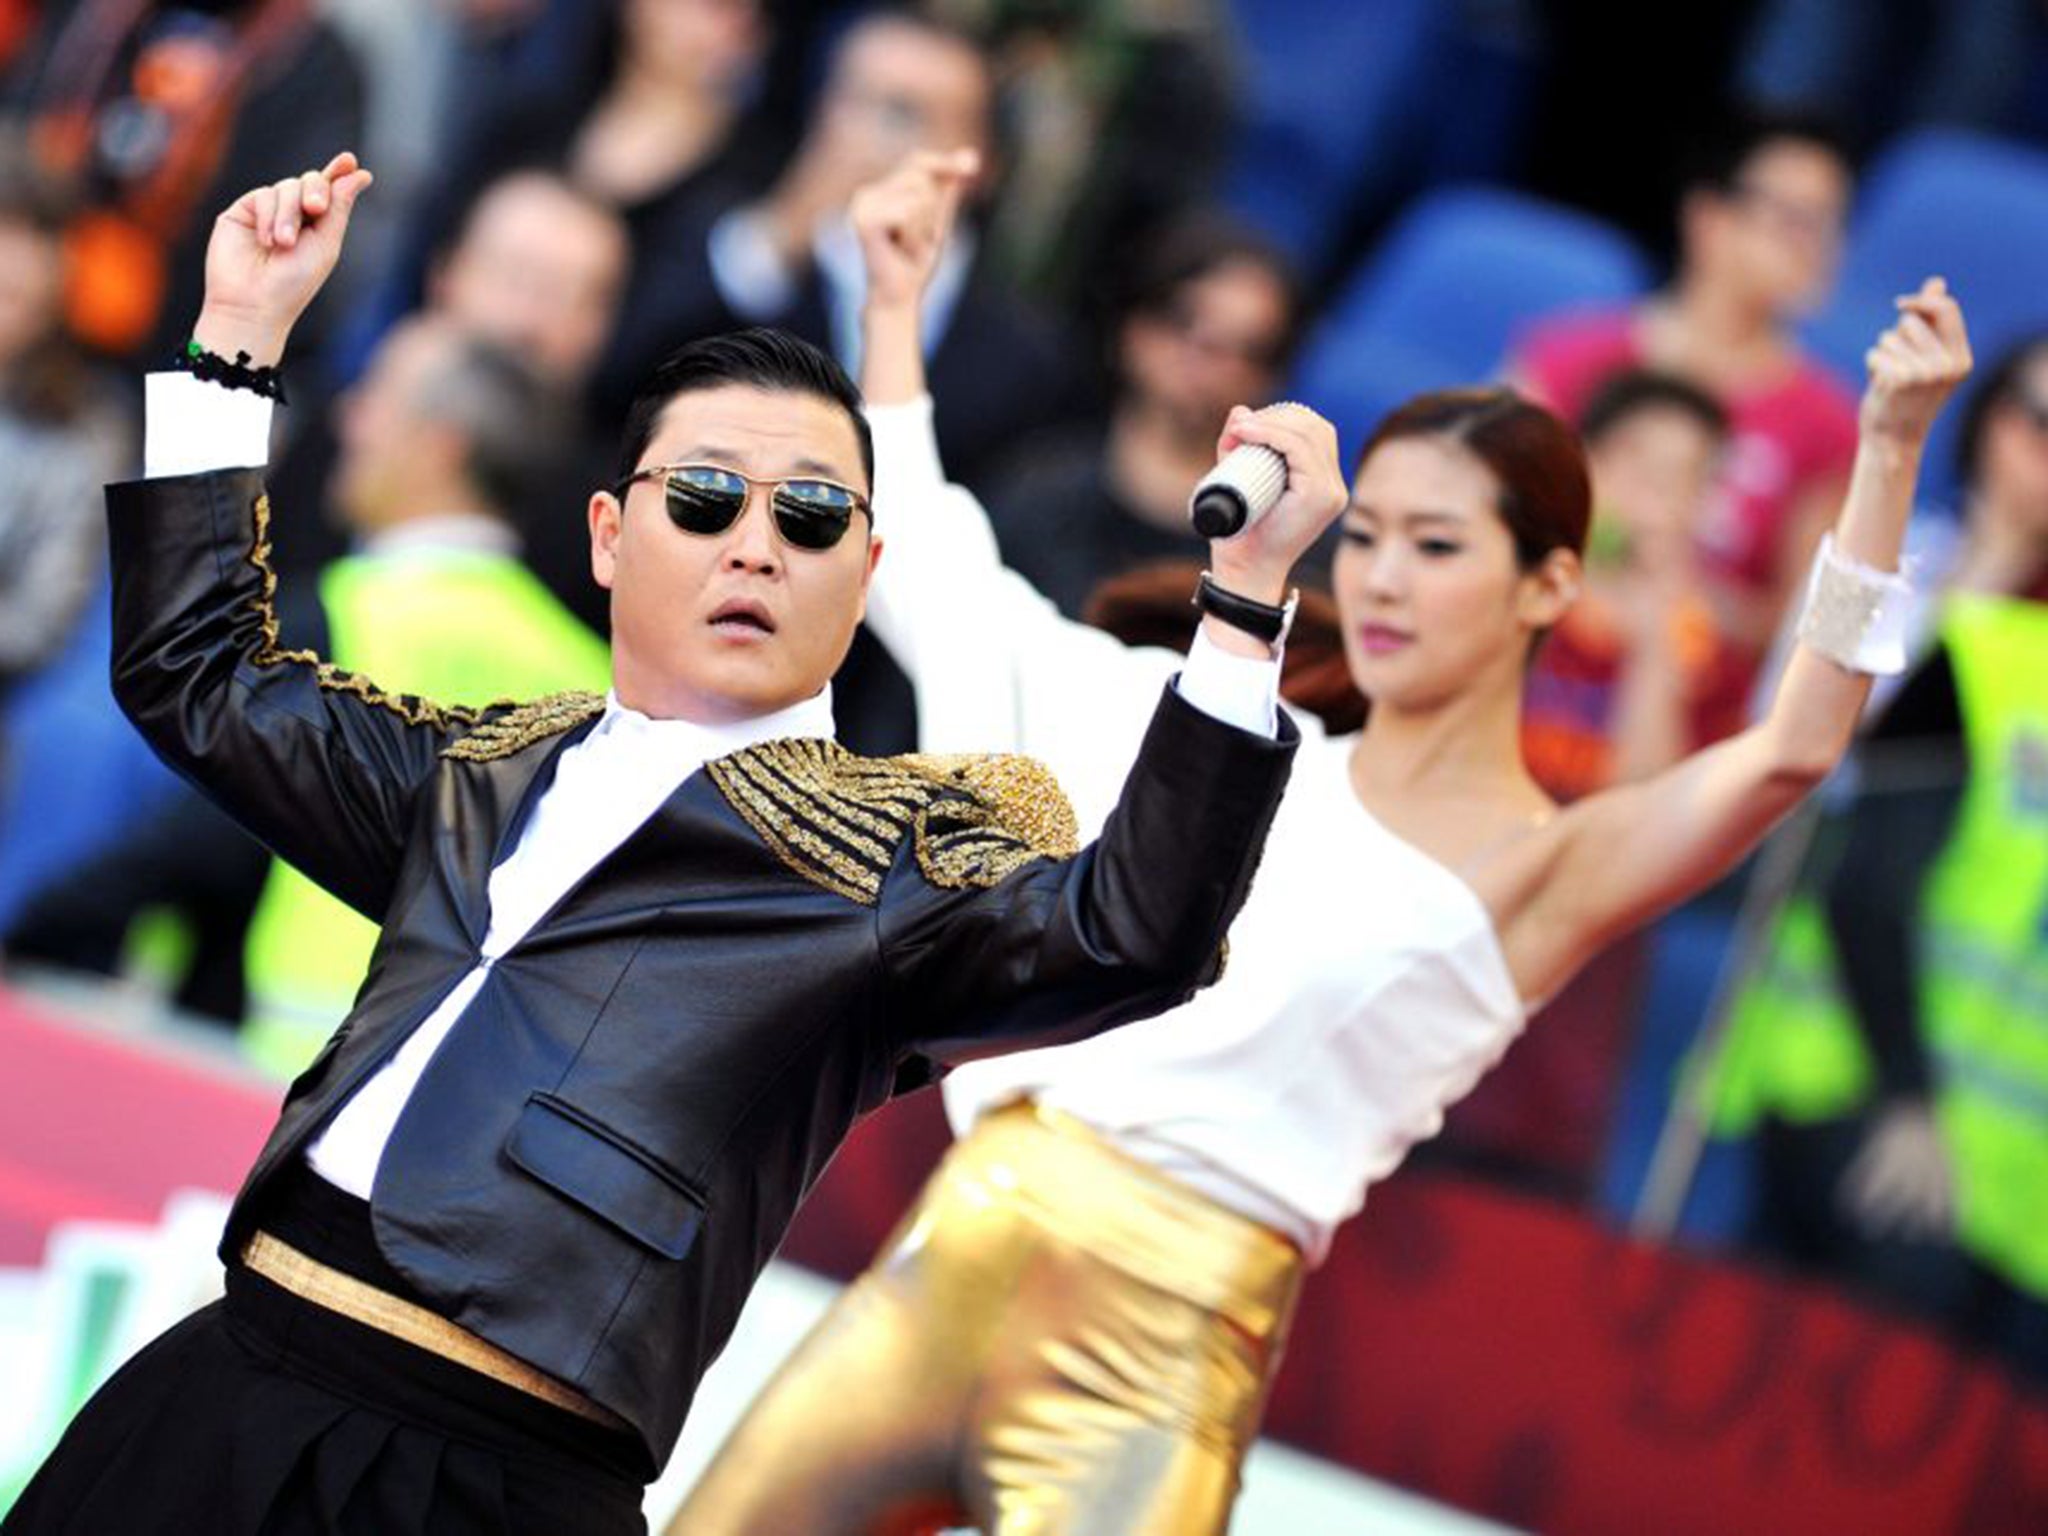 YouTube star Psy is accused of cashing in on rising property prices